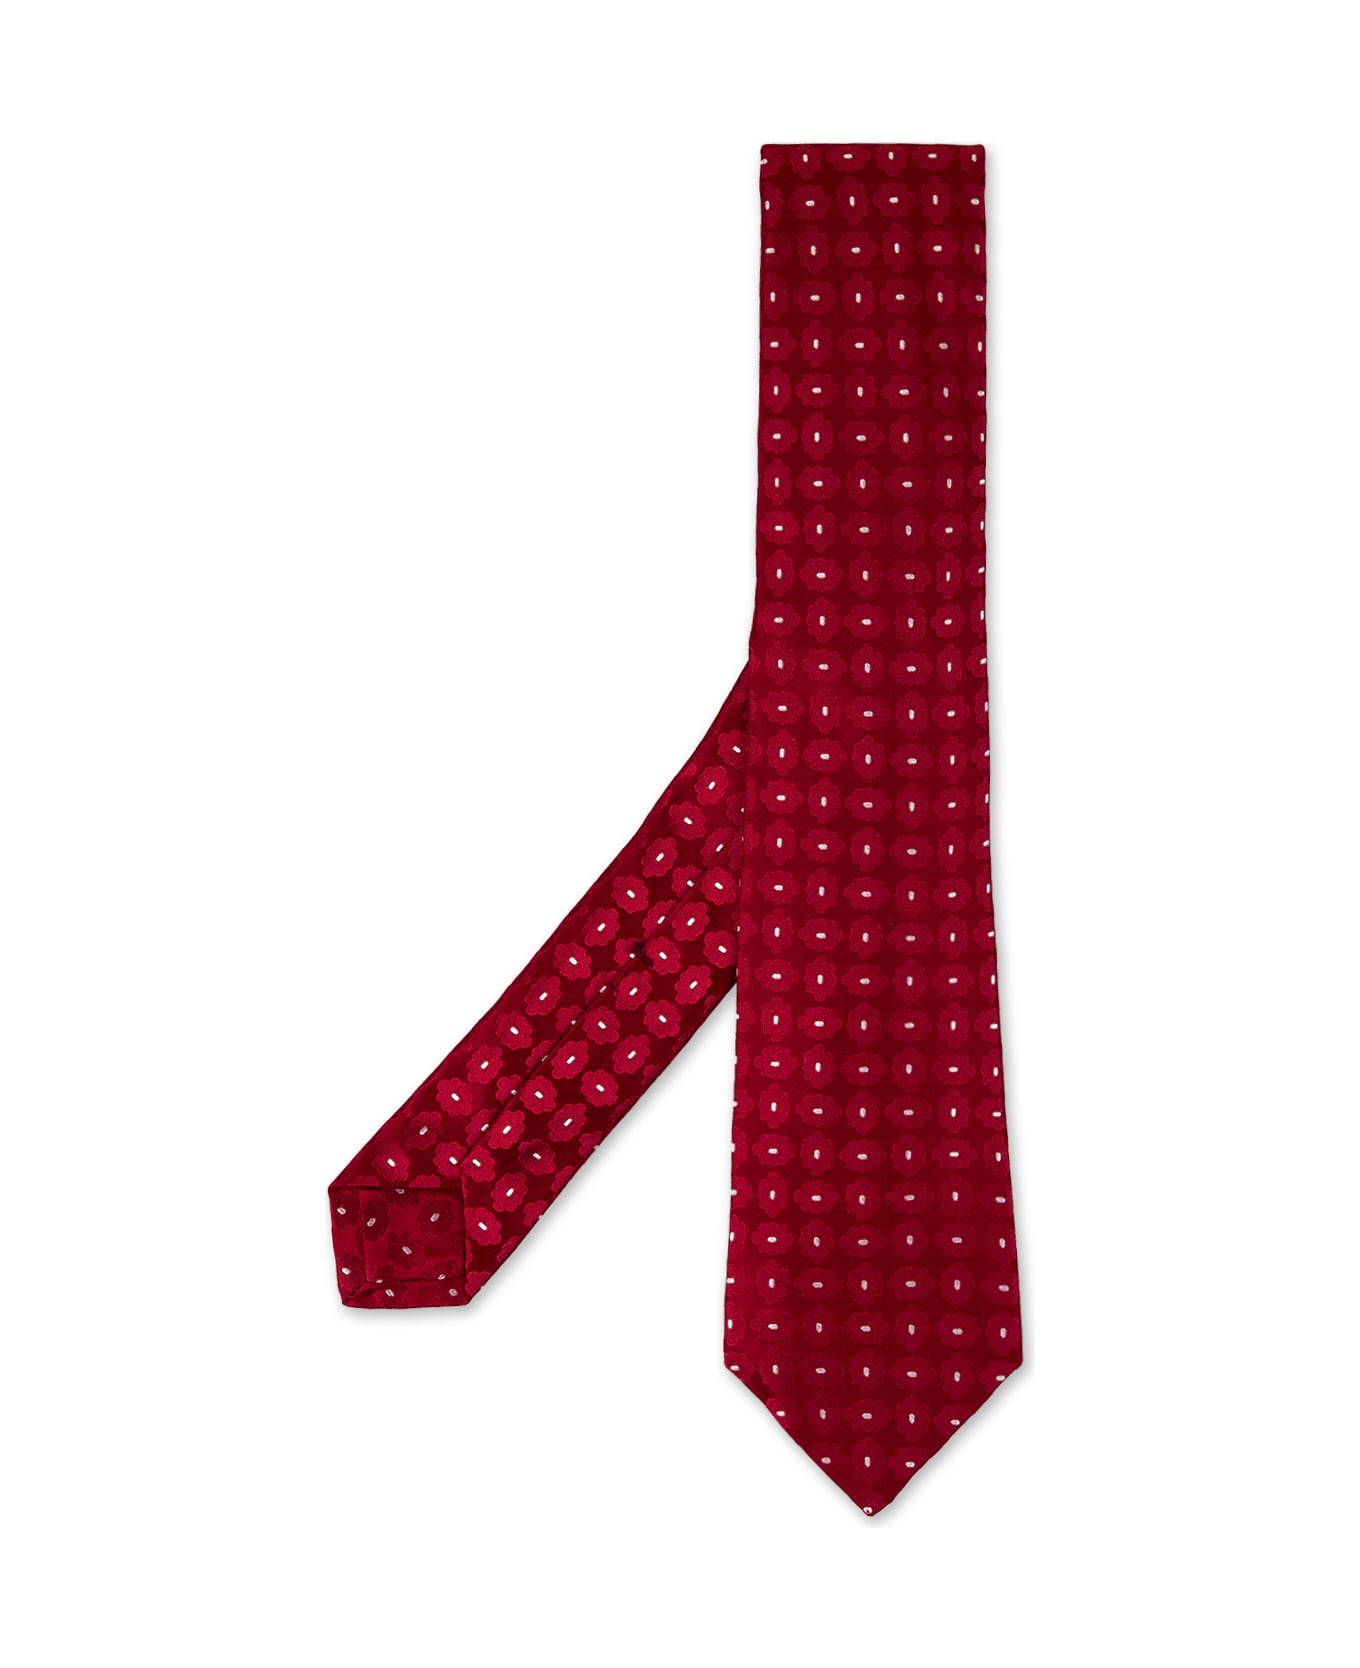 Kiton Red Tie With Floral Pattern - Red